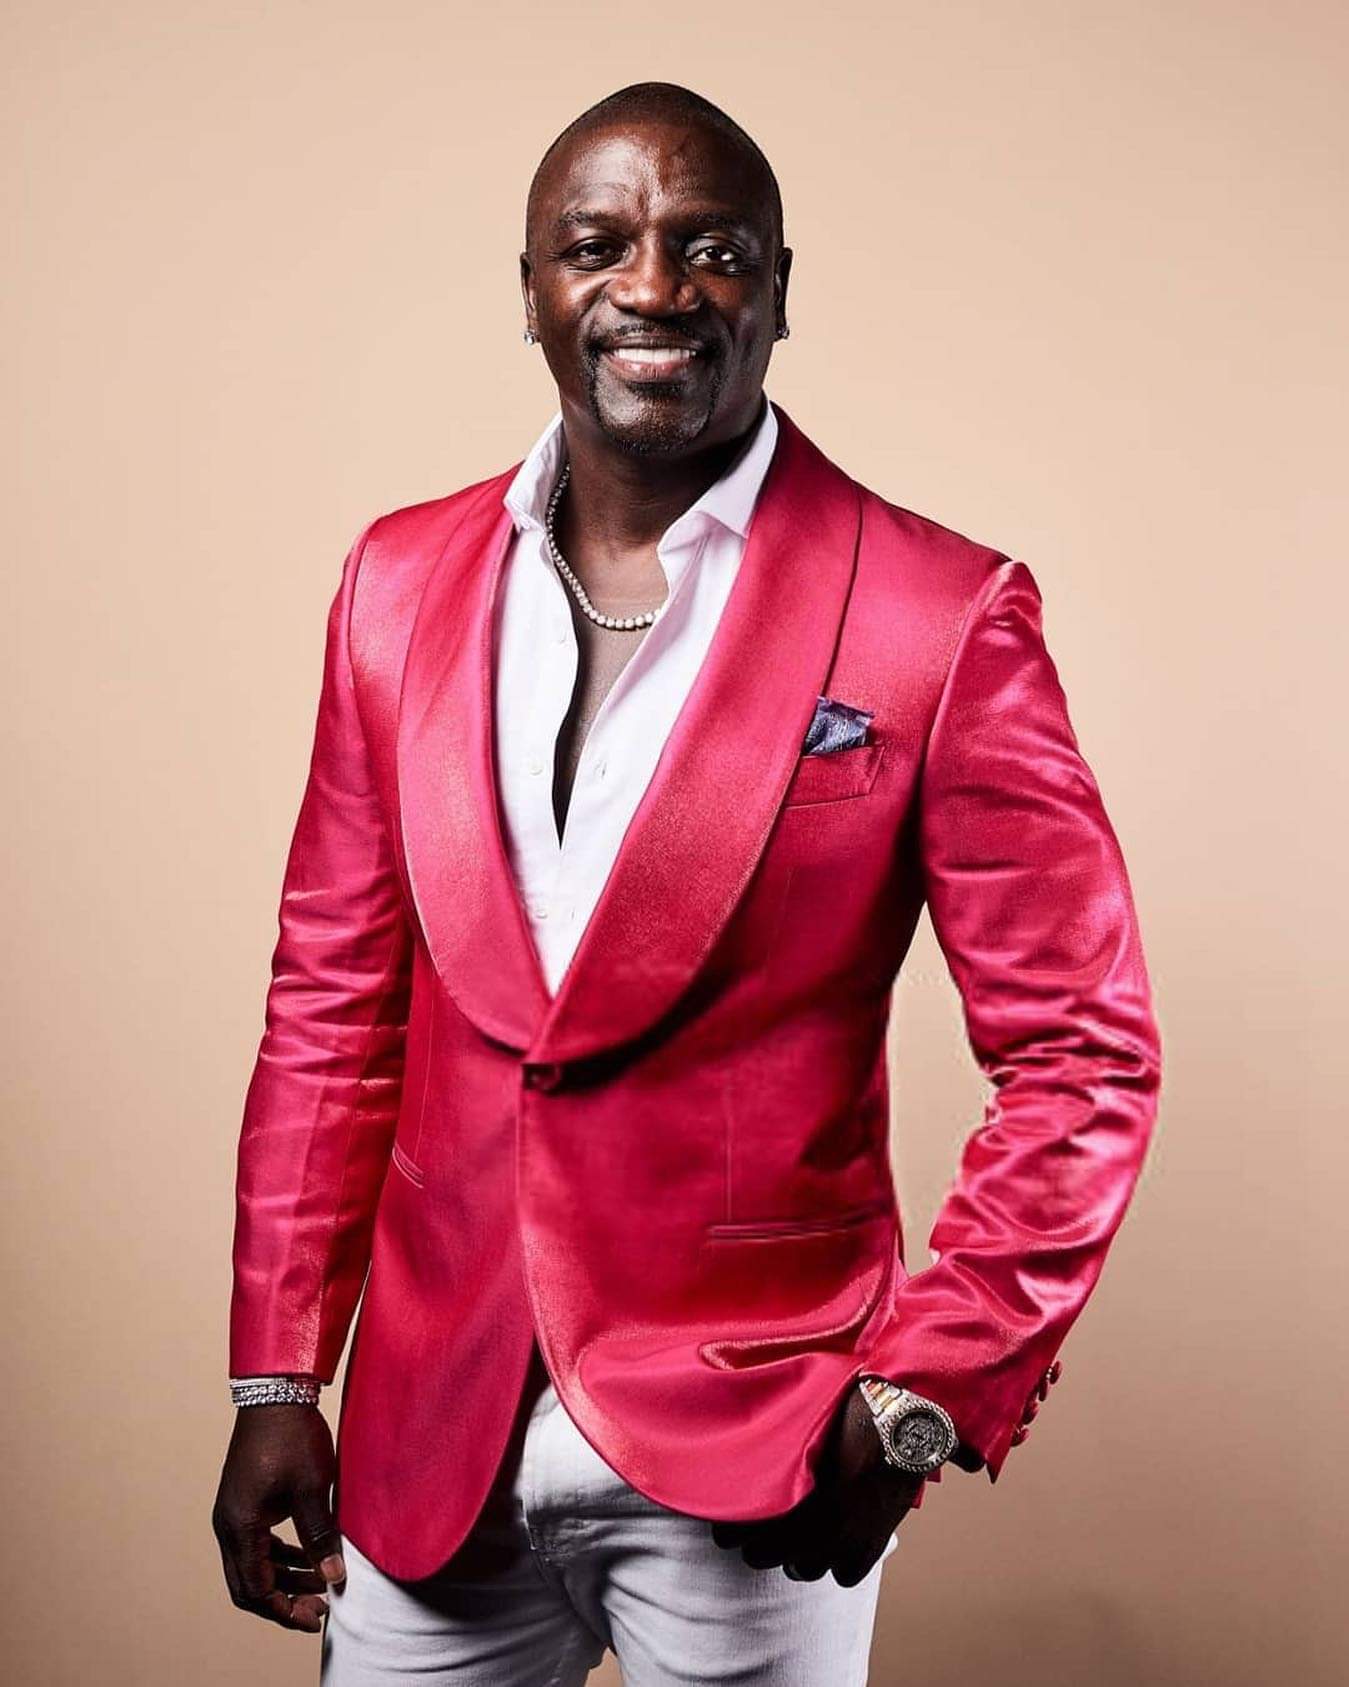 Akon Biography, Net Worth, Age, Real Name, Hometown, Height, Weight, Parents